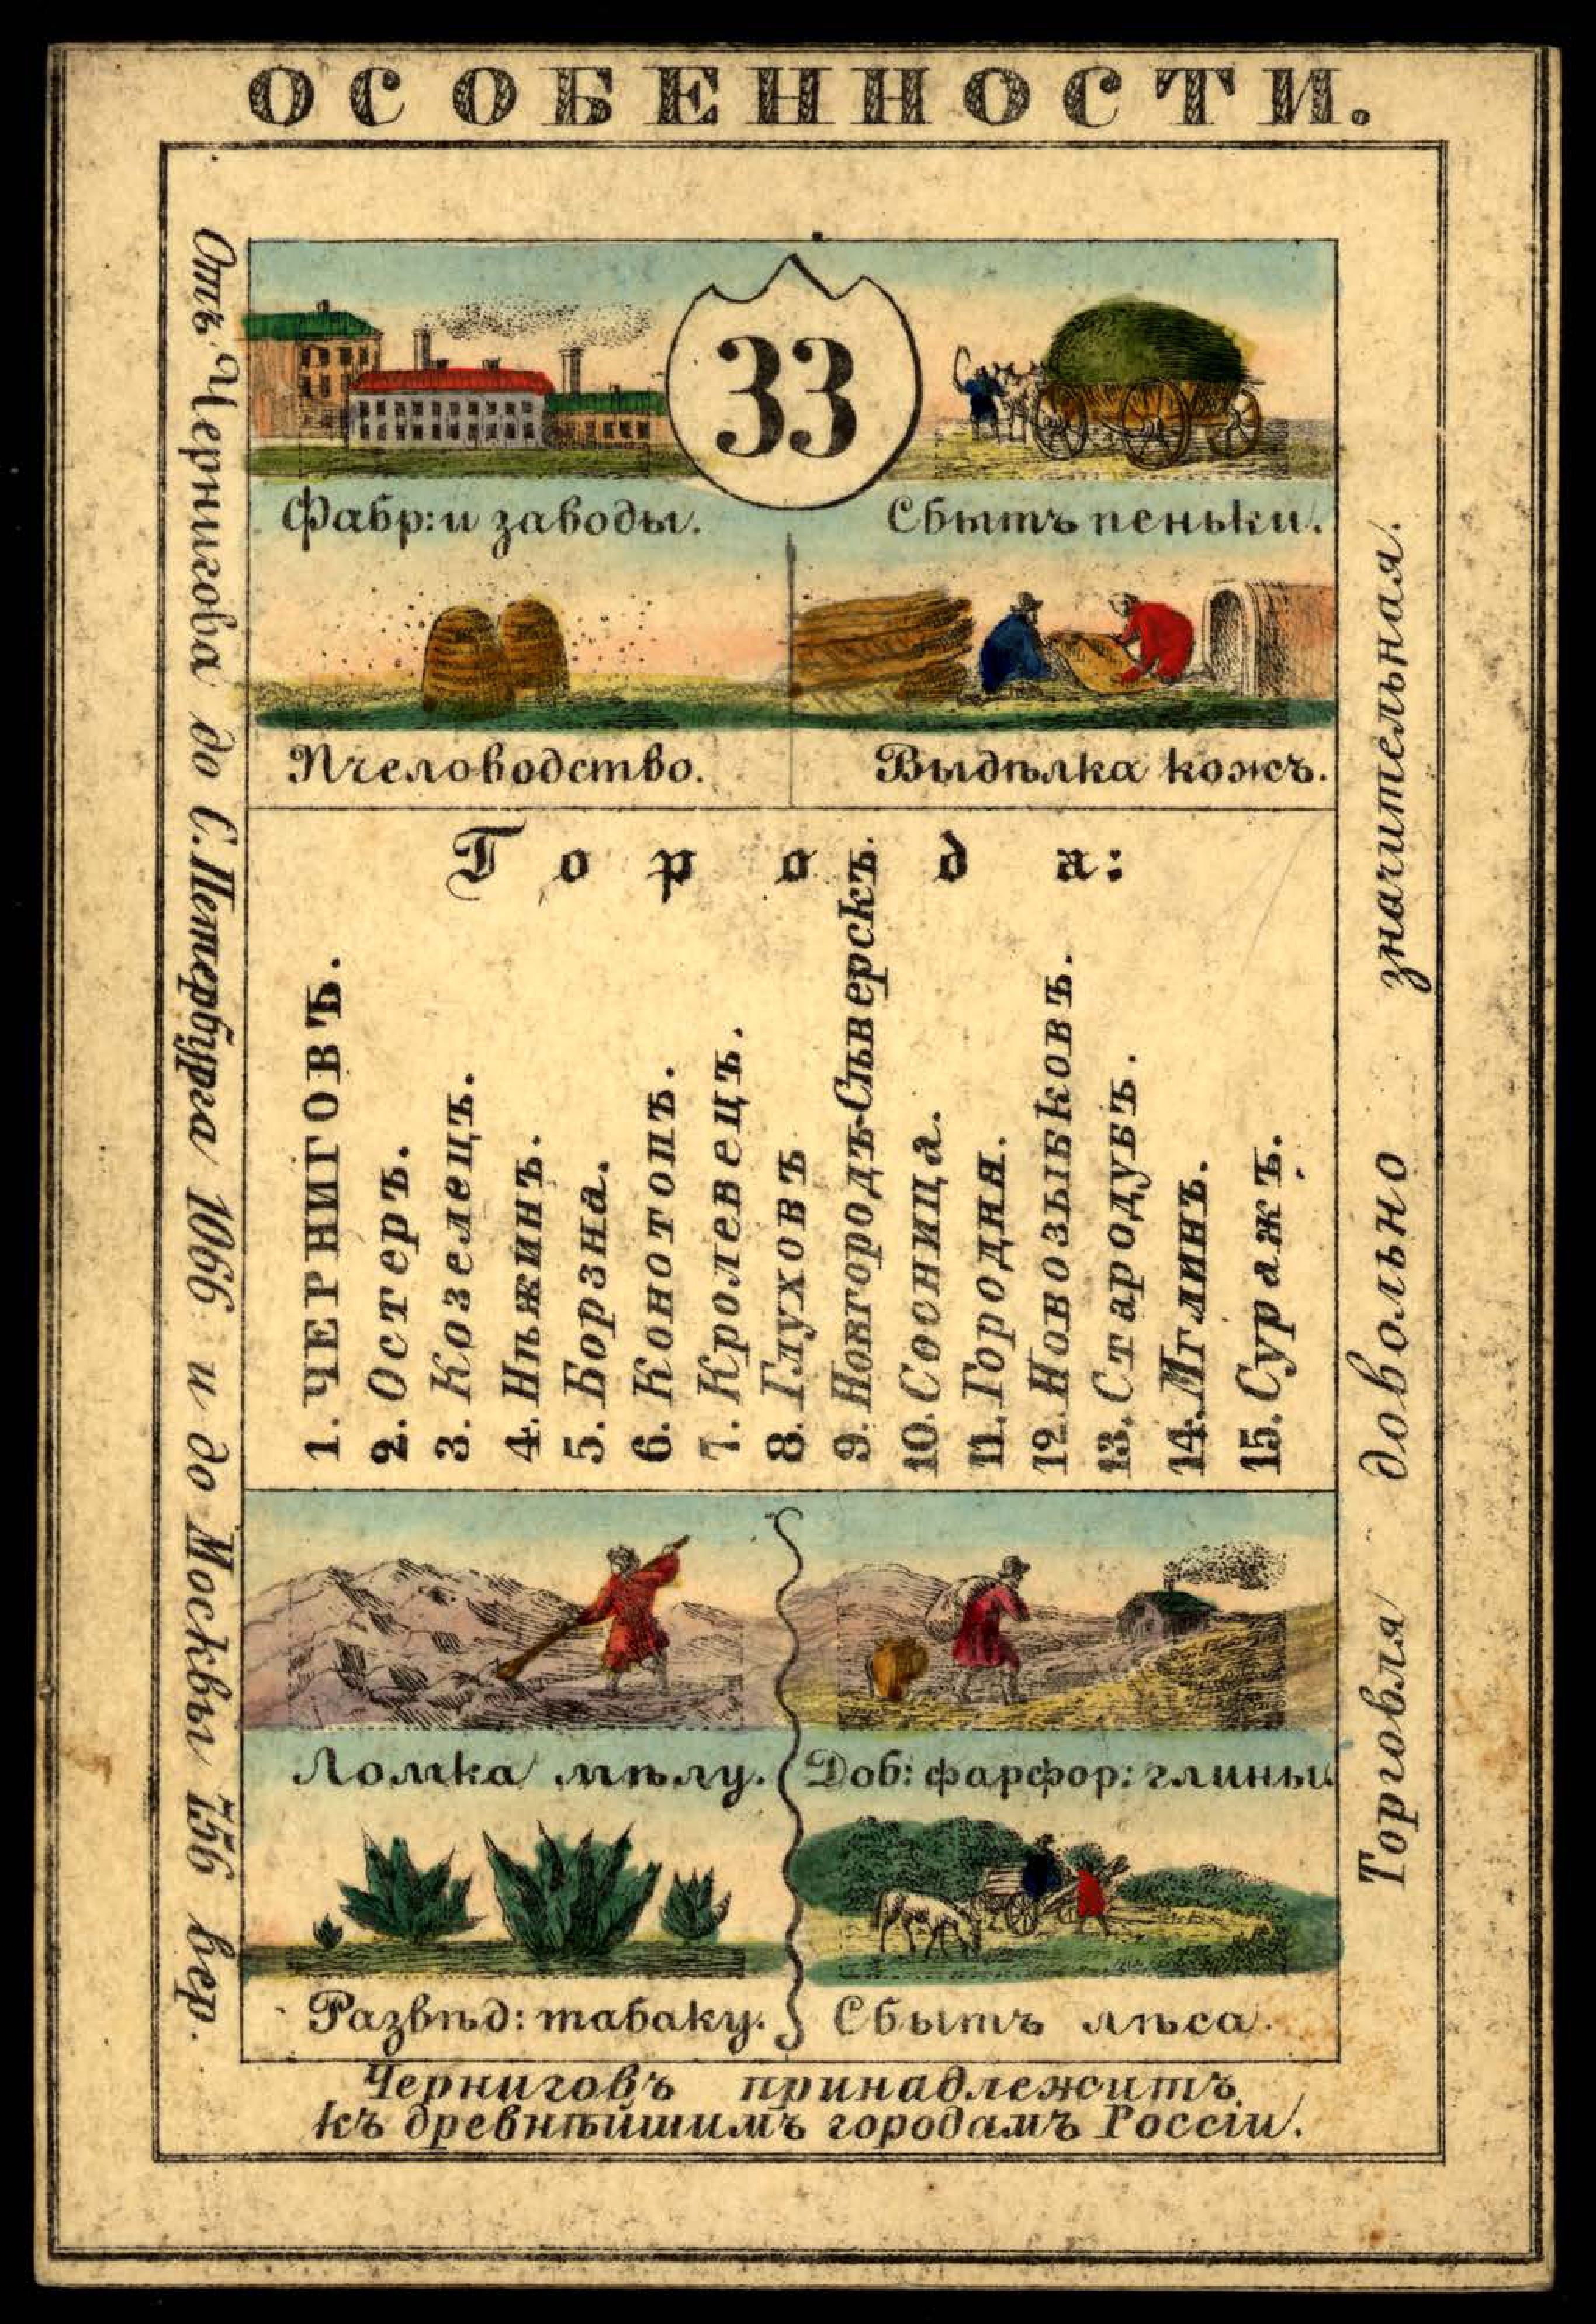 1856. Card from set of geographical cards of the Russian Empire 149